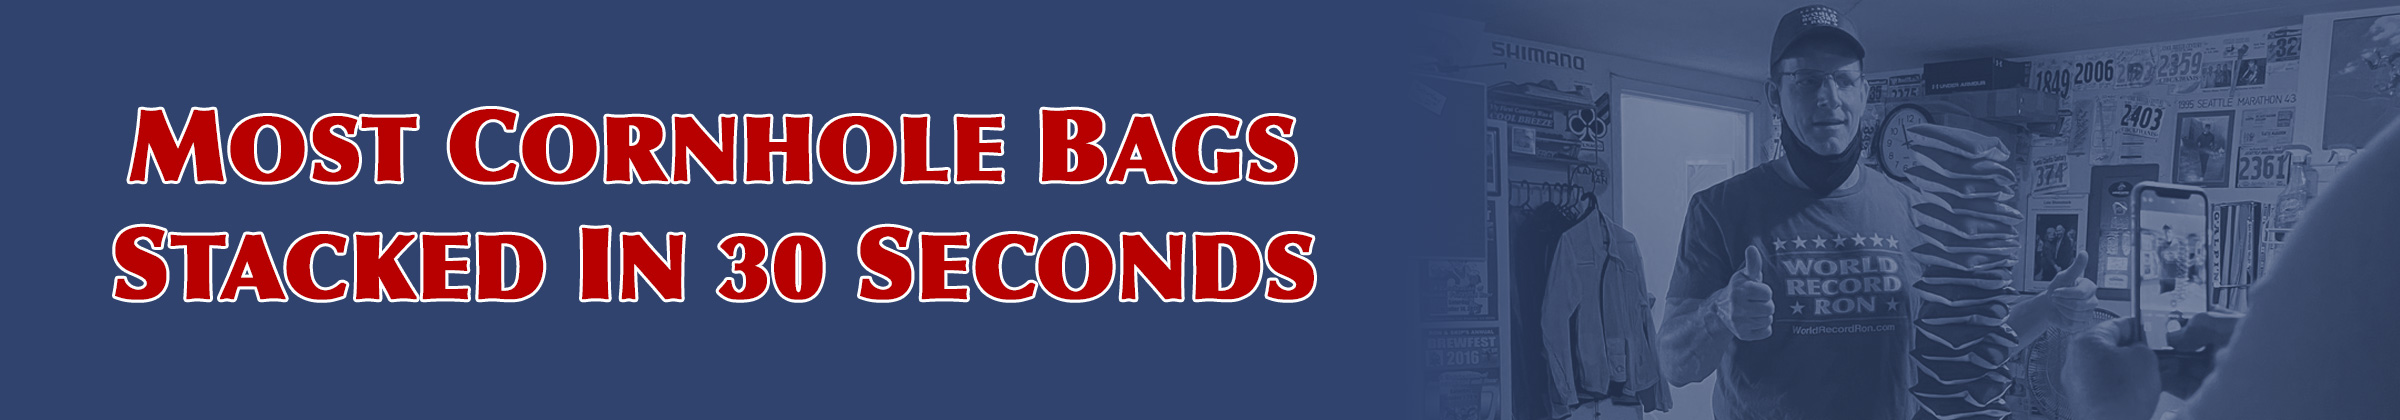 Most Cornhole Bags Stacked in 30 Seconds